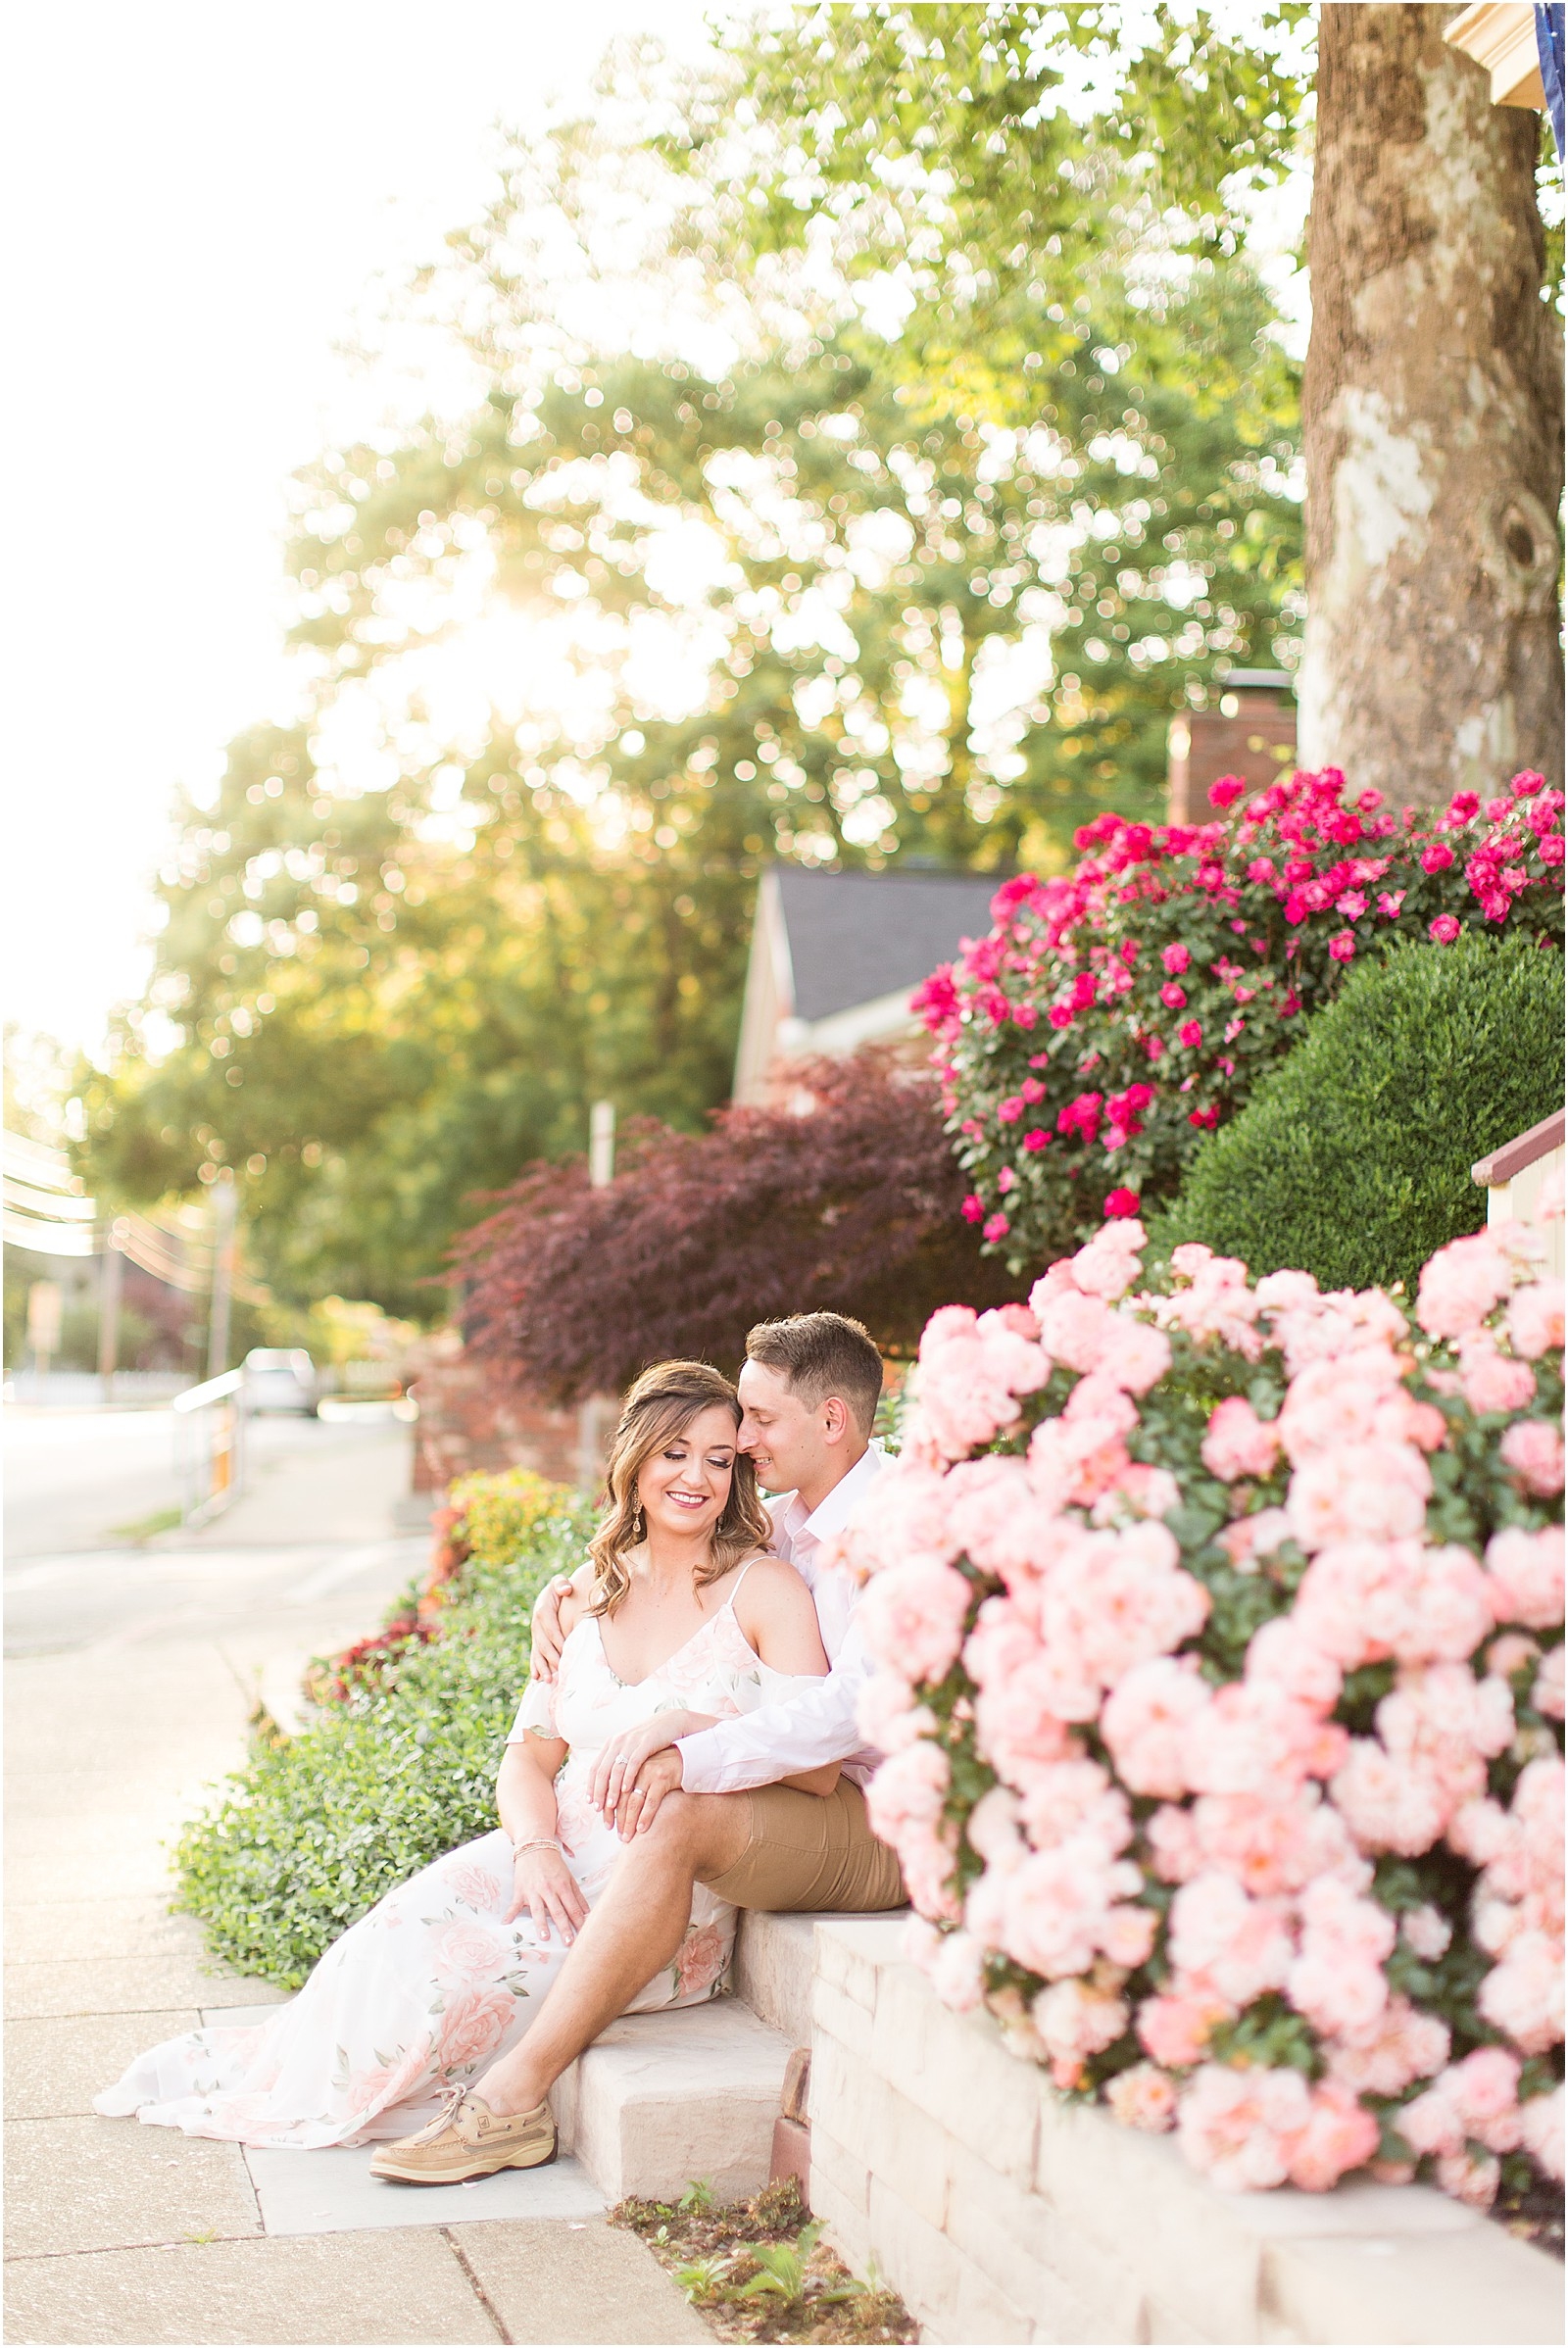 20 West Downtown Newburgh Anniversary Session | Katie and Bobby | Bret and Brandie Photography 010.jpg